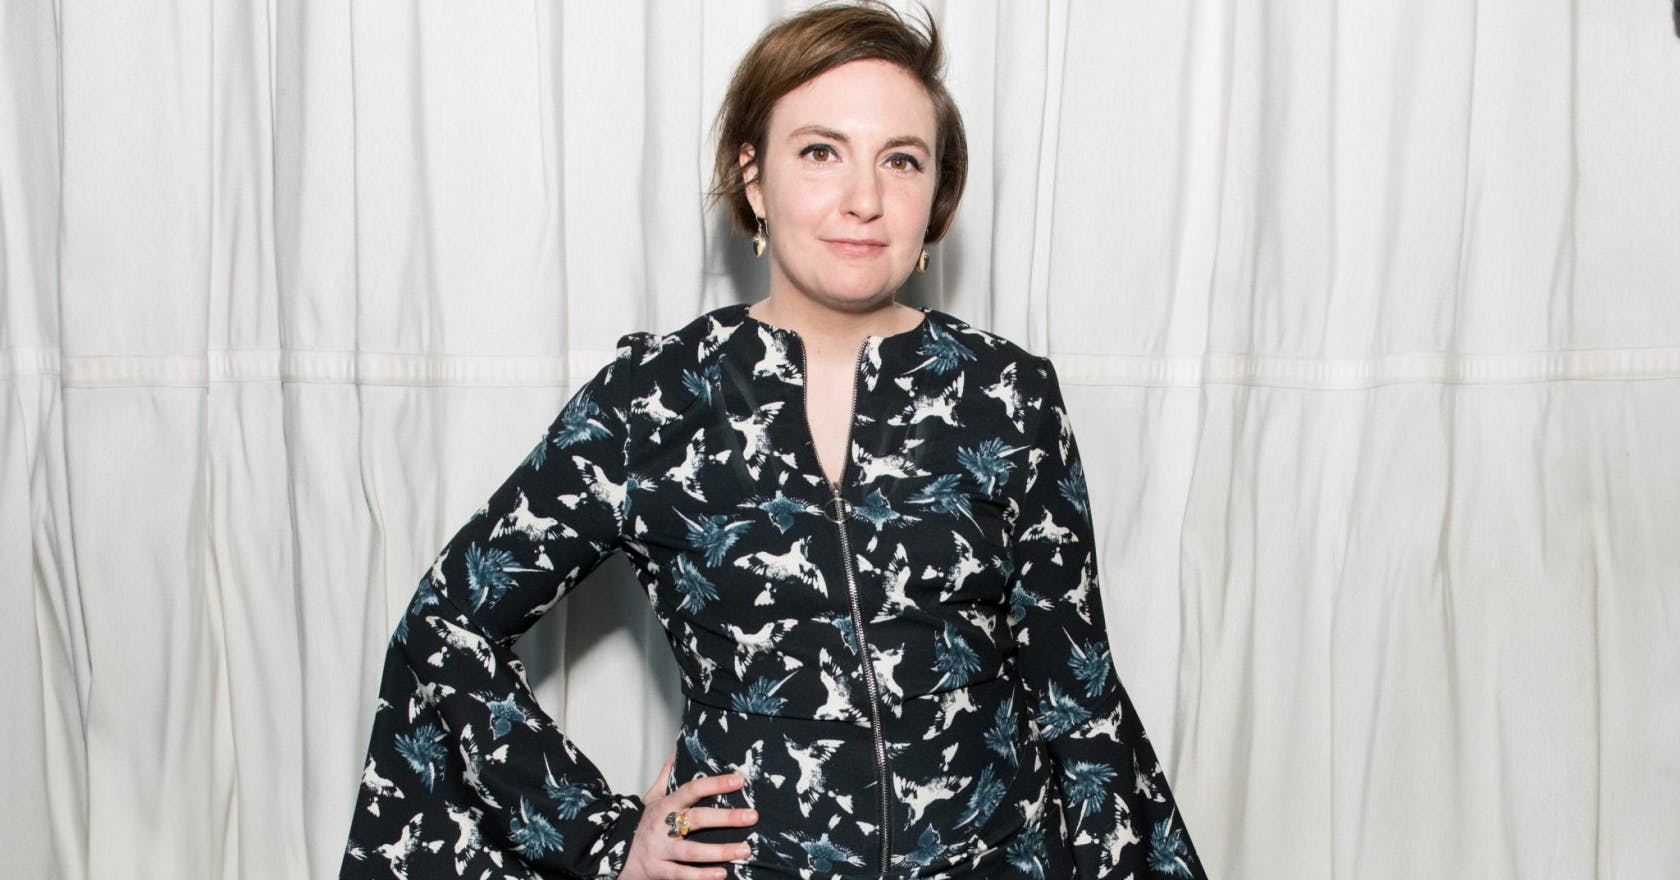 Lena Dunham Gets Real About Losing Her Virginity At 20